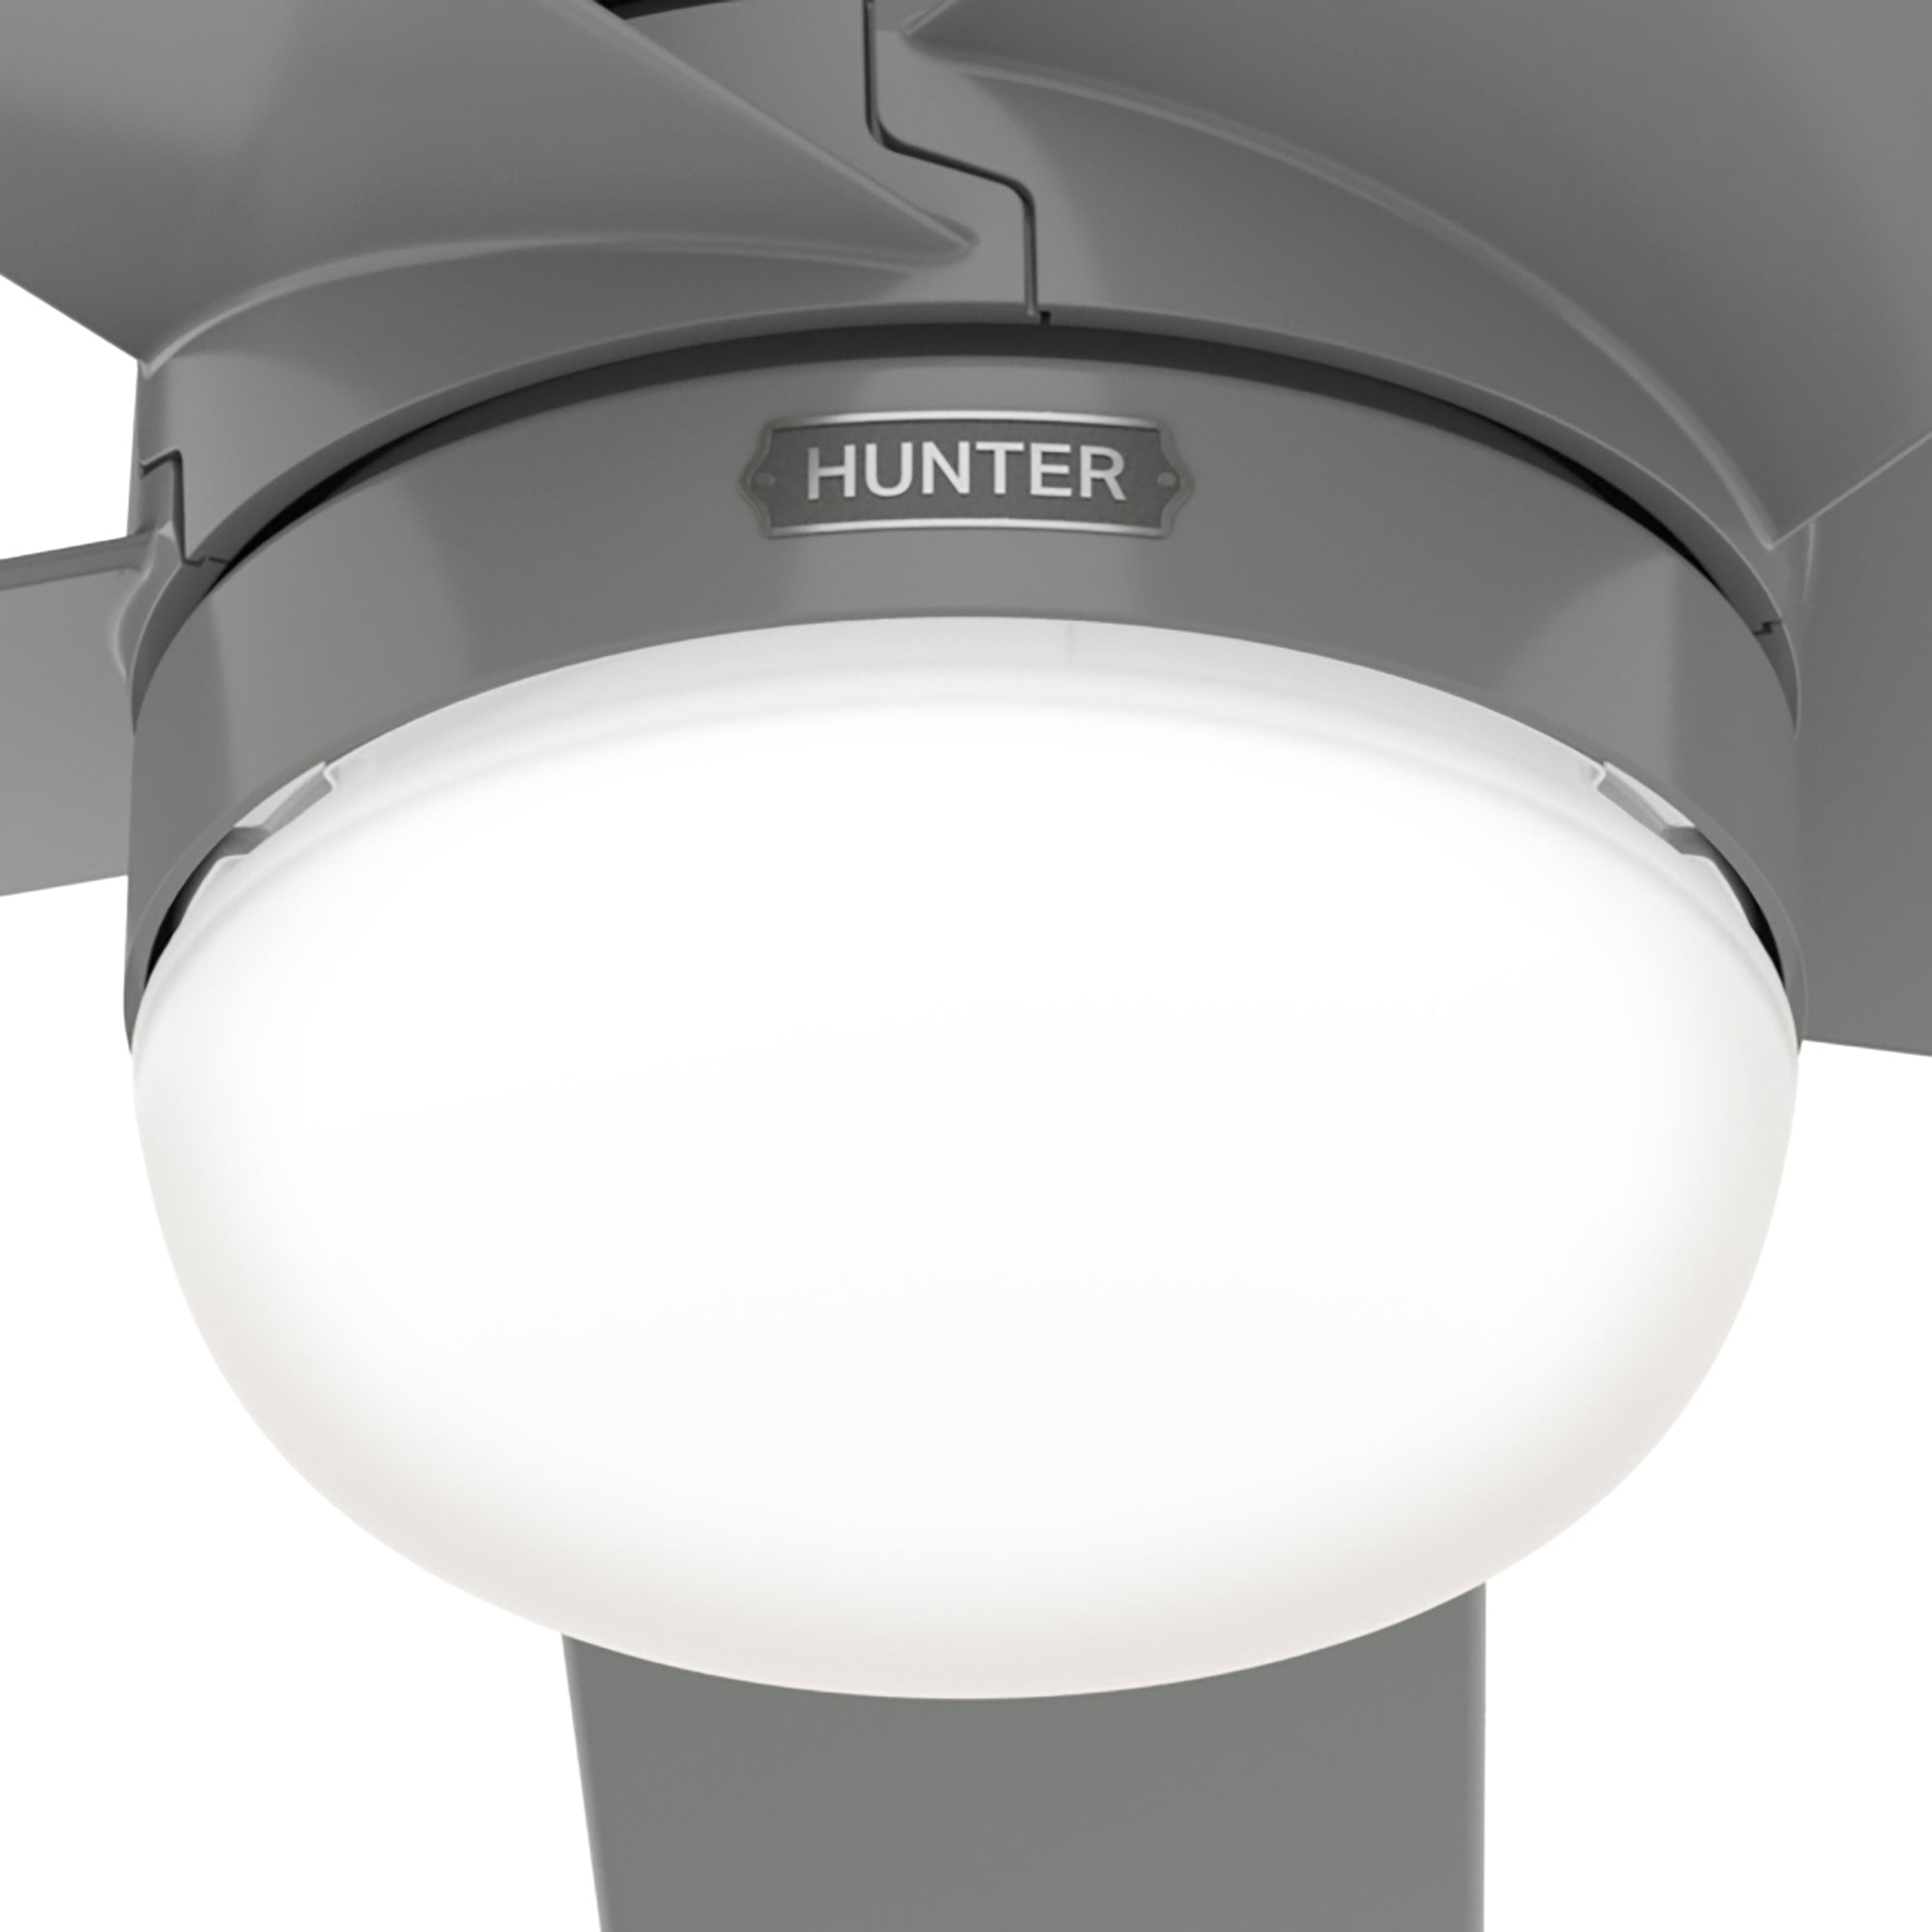 Hunter 52 inch Anorak Indoor / Outdoor Ceiling Fan with LED Light Kit and Wall Control